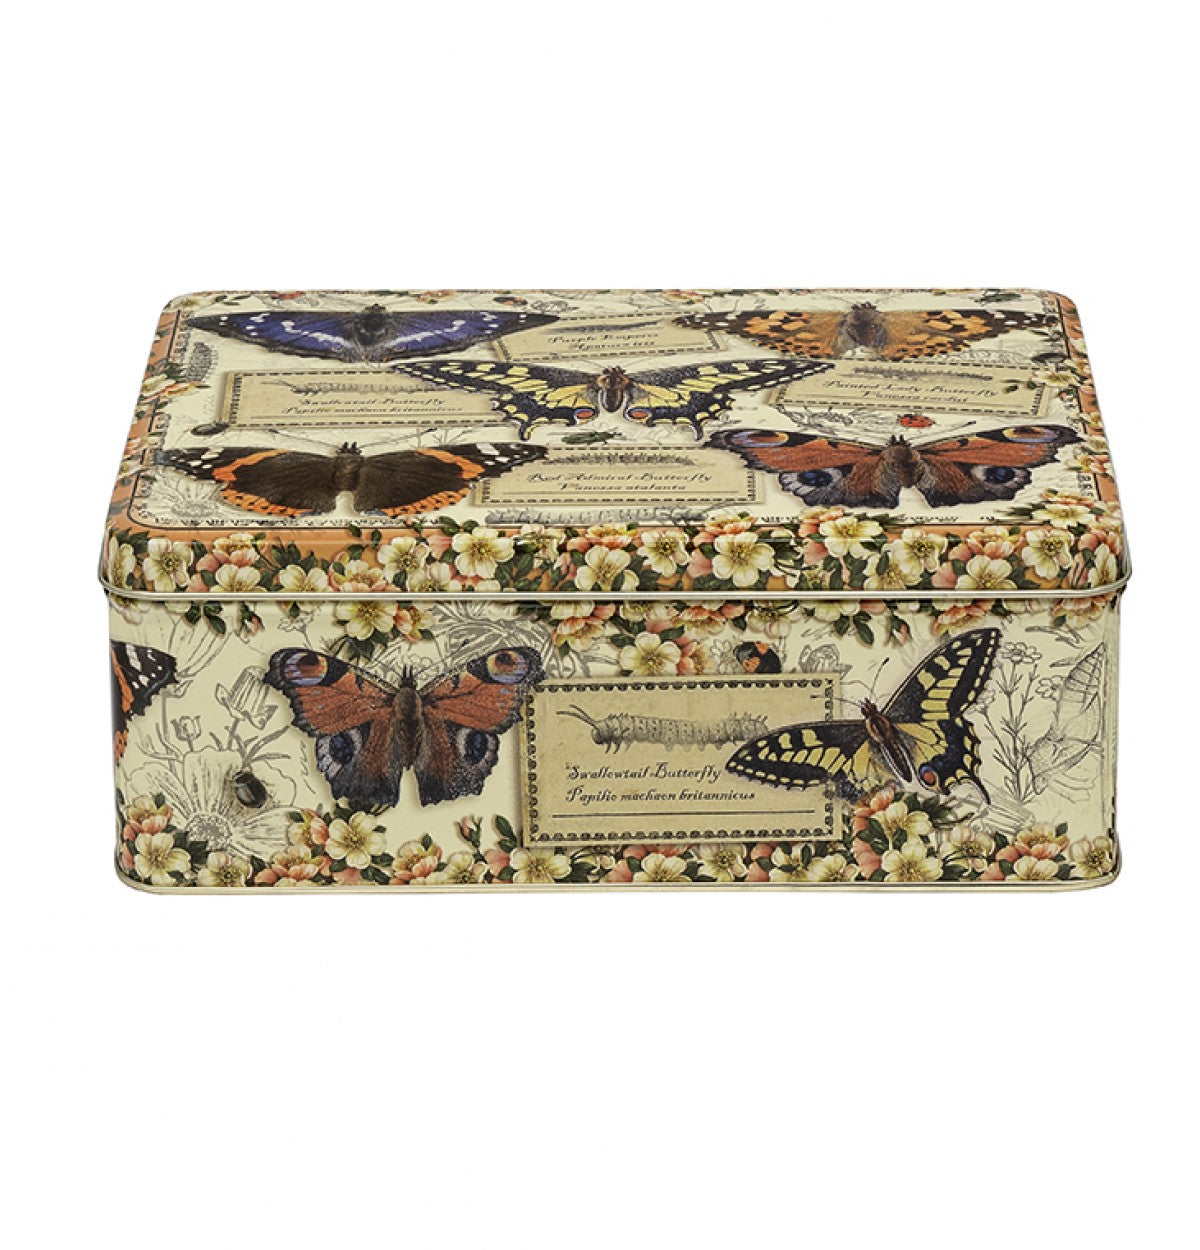 Vintage Butterfly biscuit tin